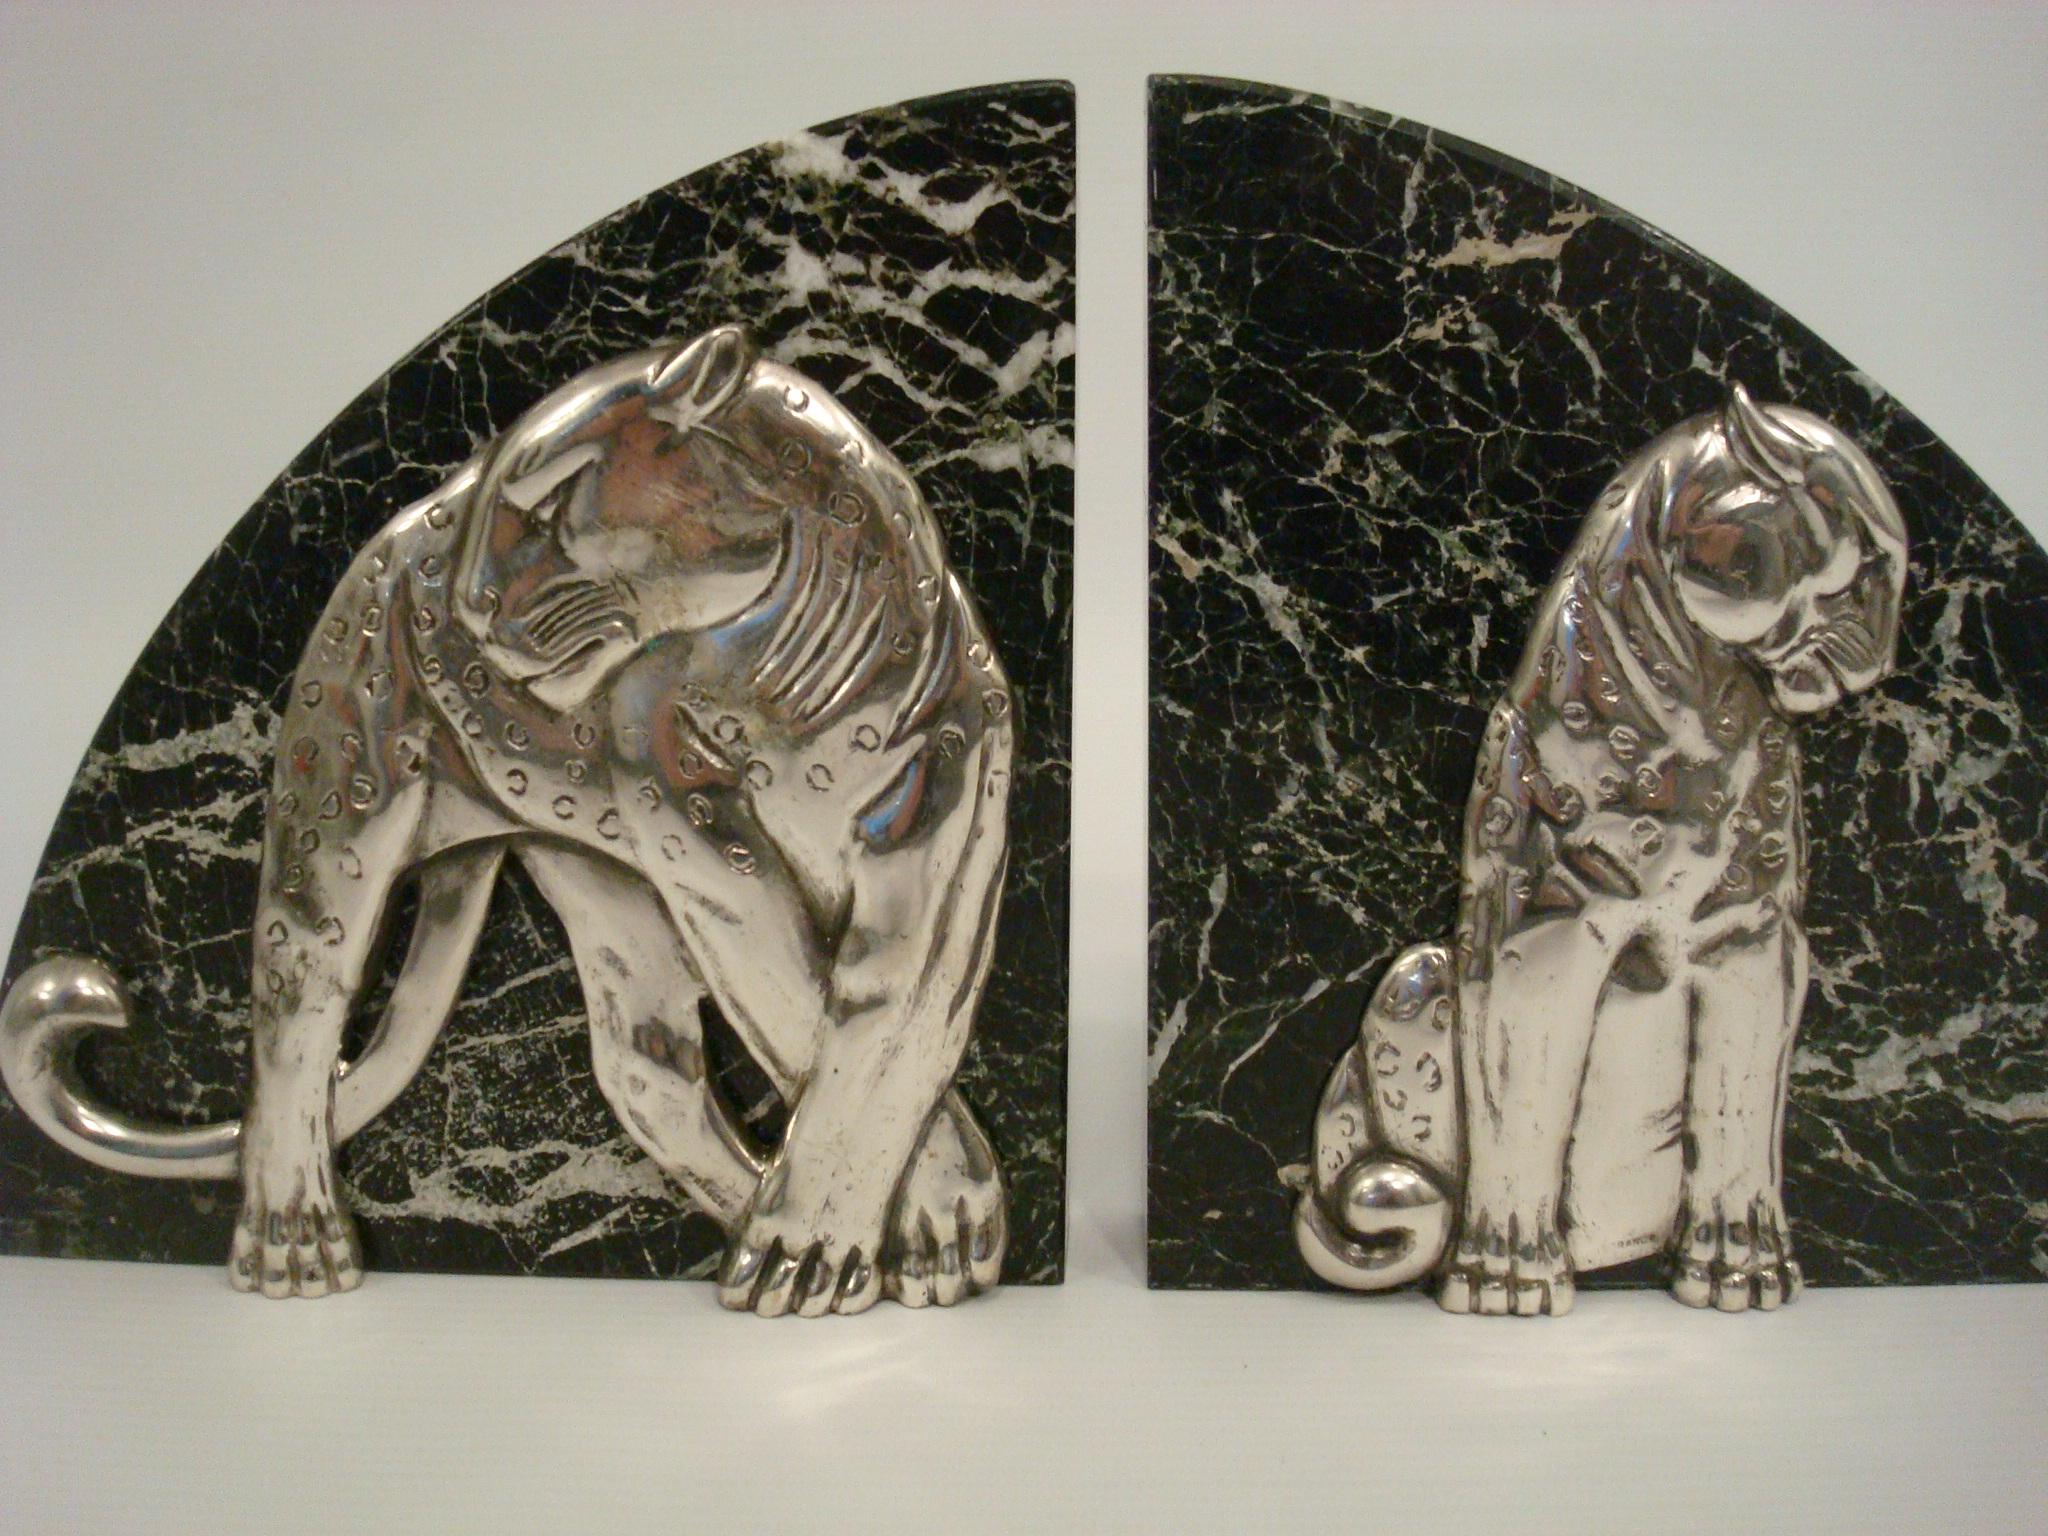 French Art Deco Pair of Panther Bookends, Silvered Bronze and Marble - France, 1920s